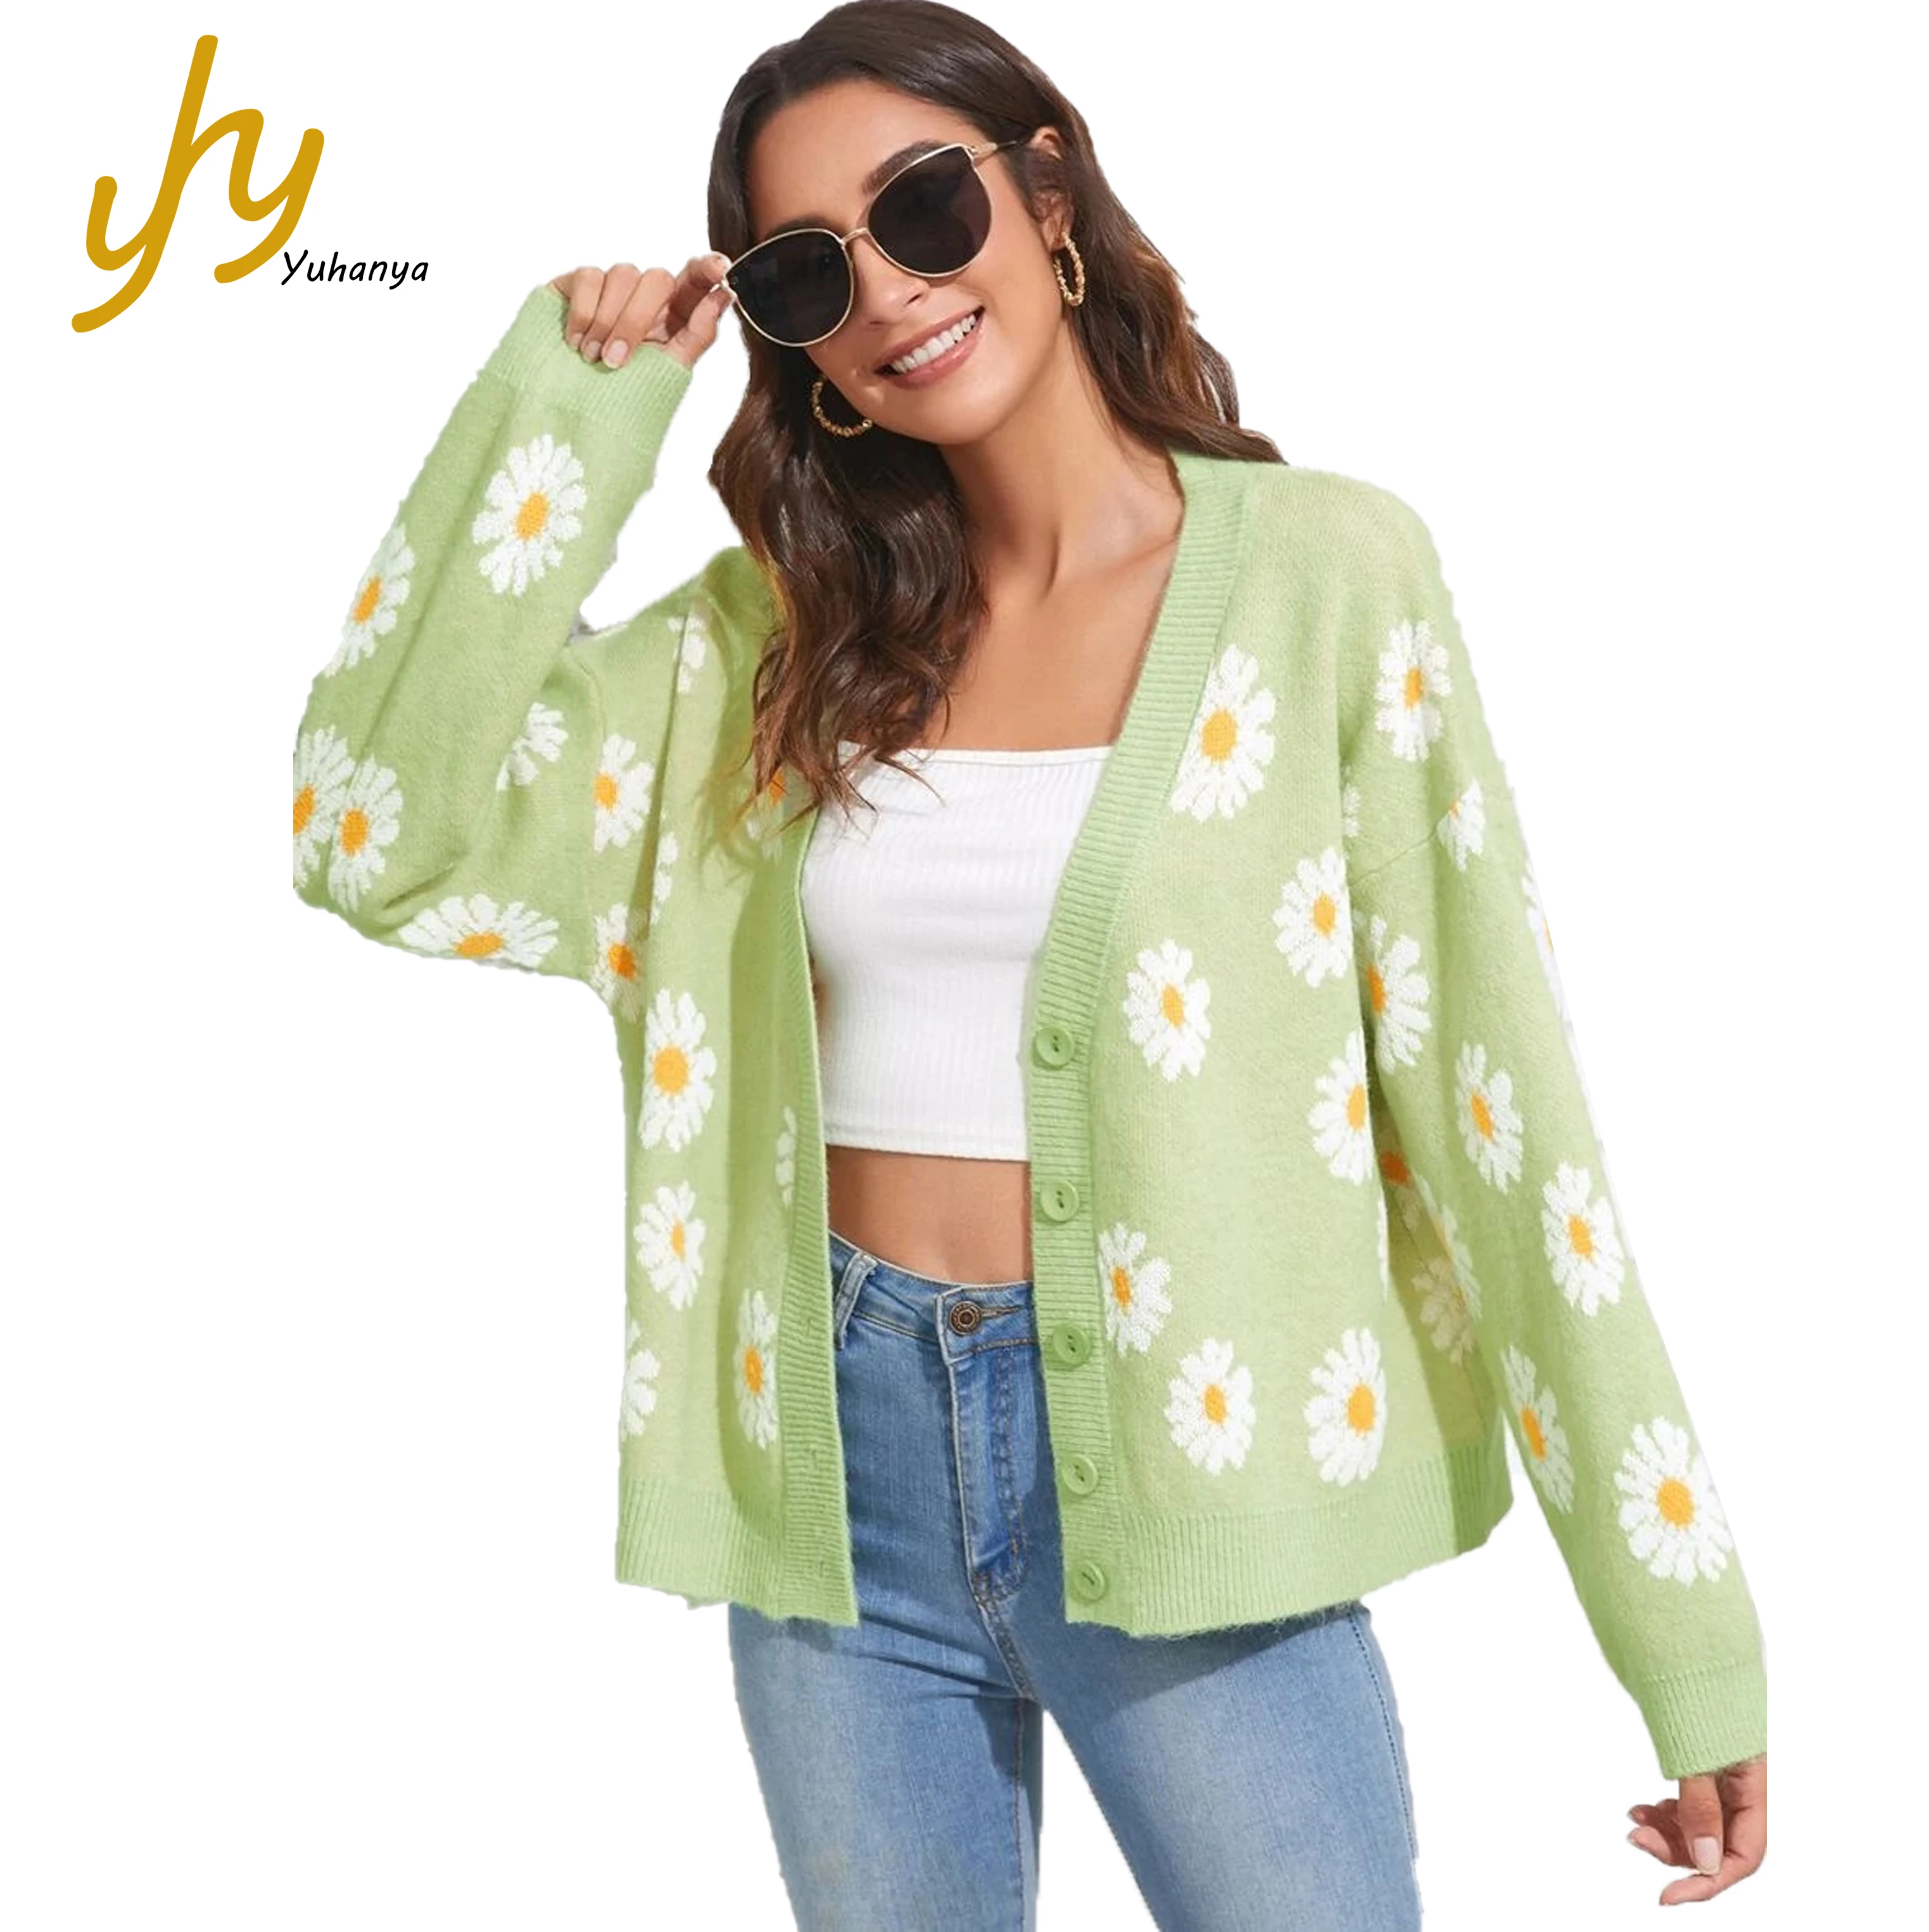 

Hot sale She in Button Front Daisy Floral Pattern Sweater Cardigan For Women, Pastel, lime green